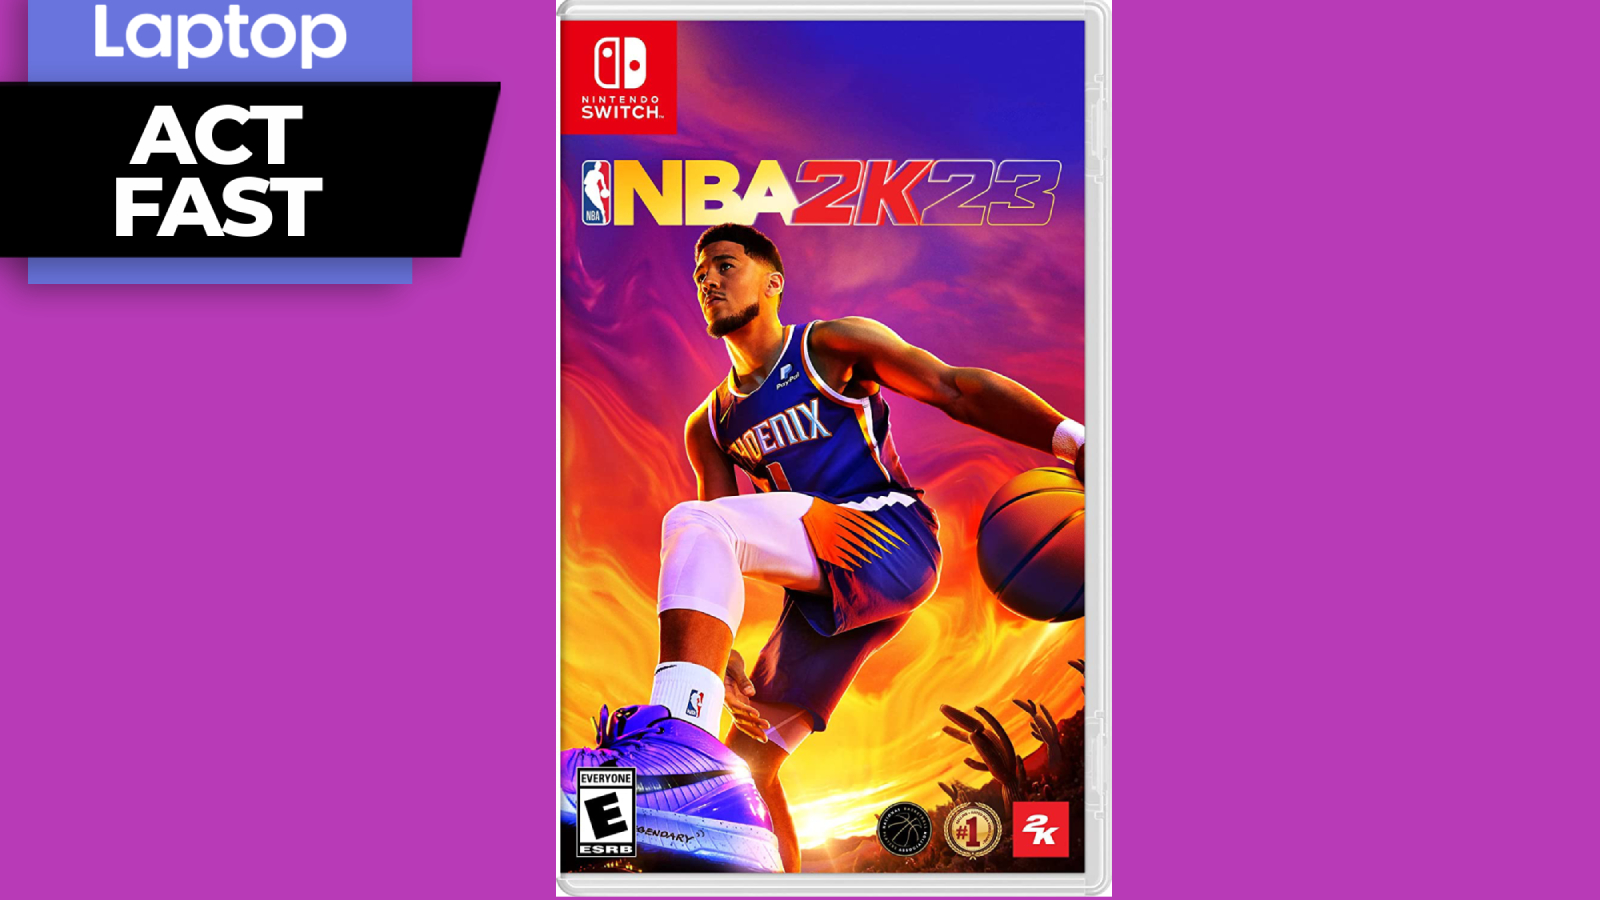 Save 55% on NBA 2K23 for Nintendo Switch